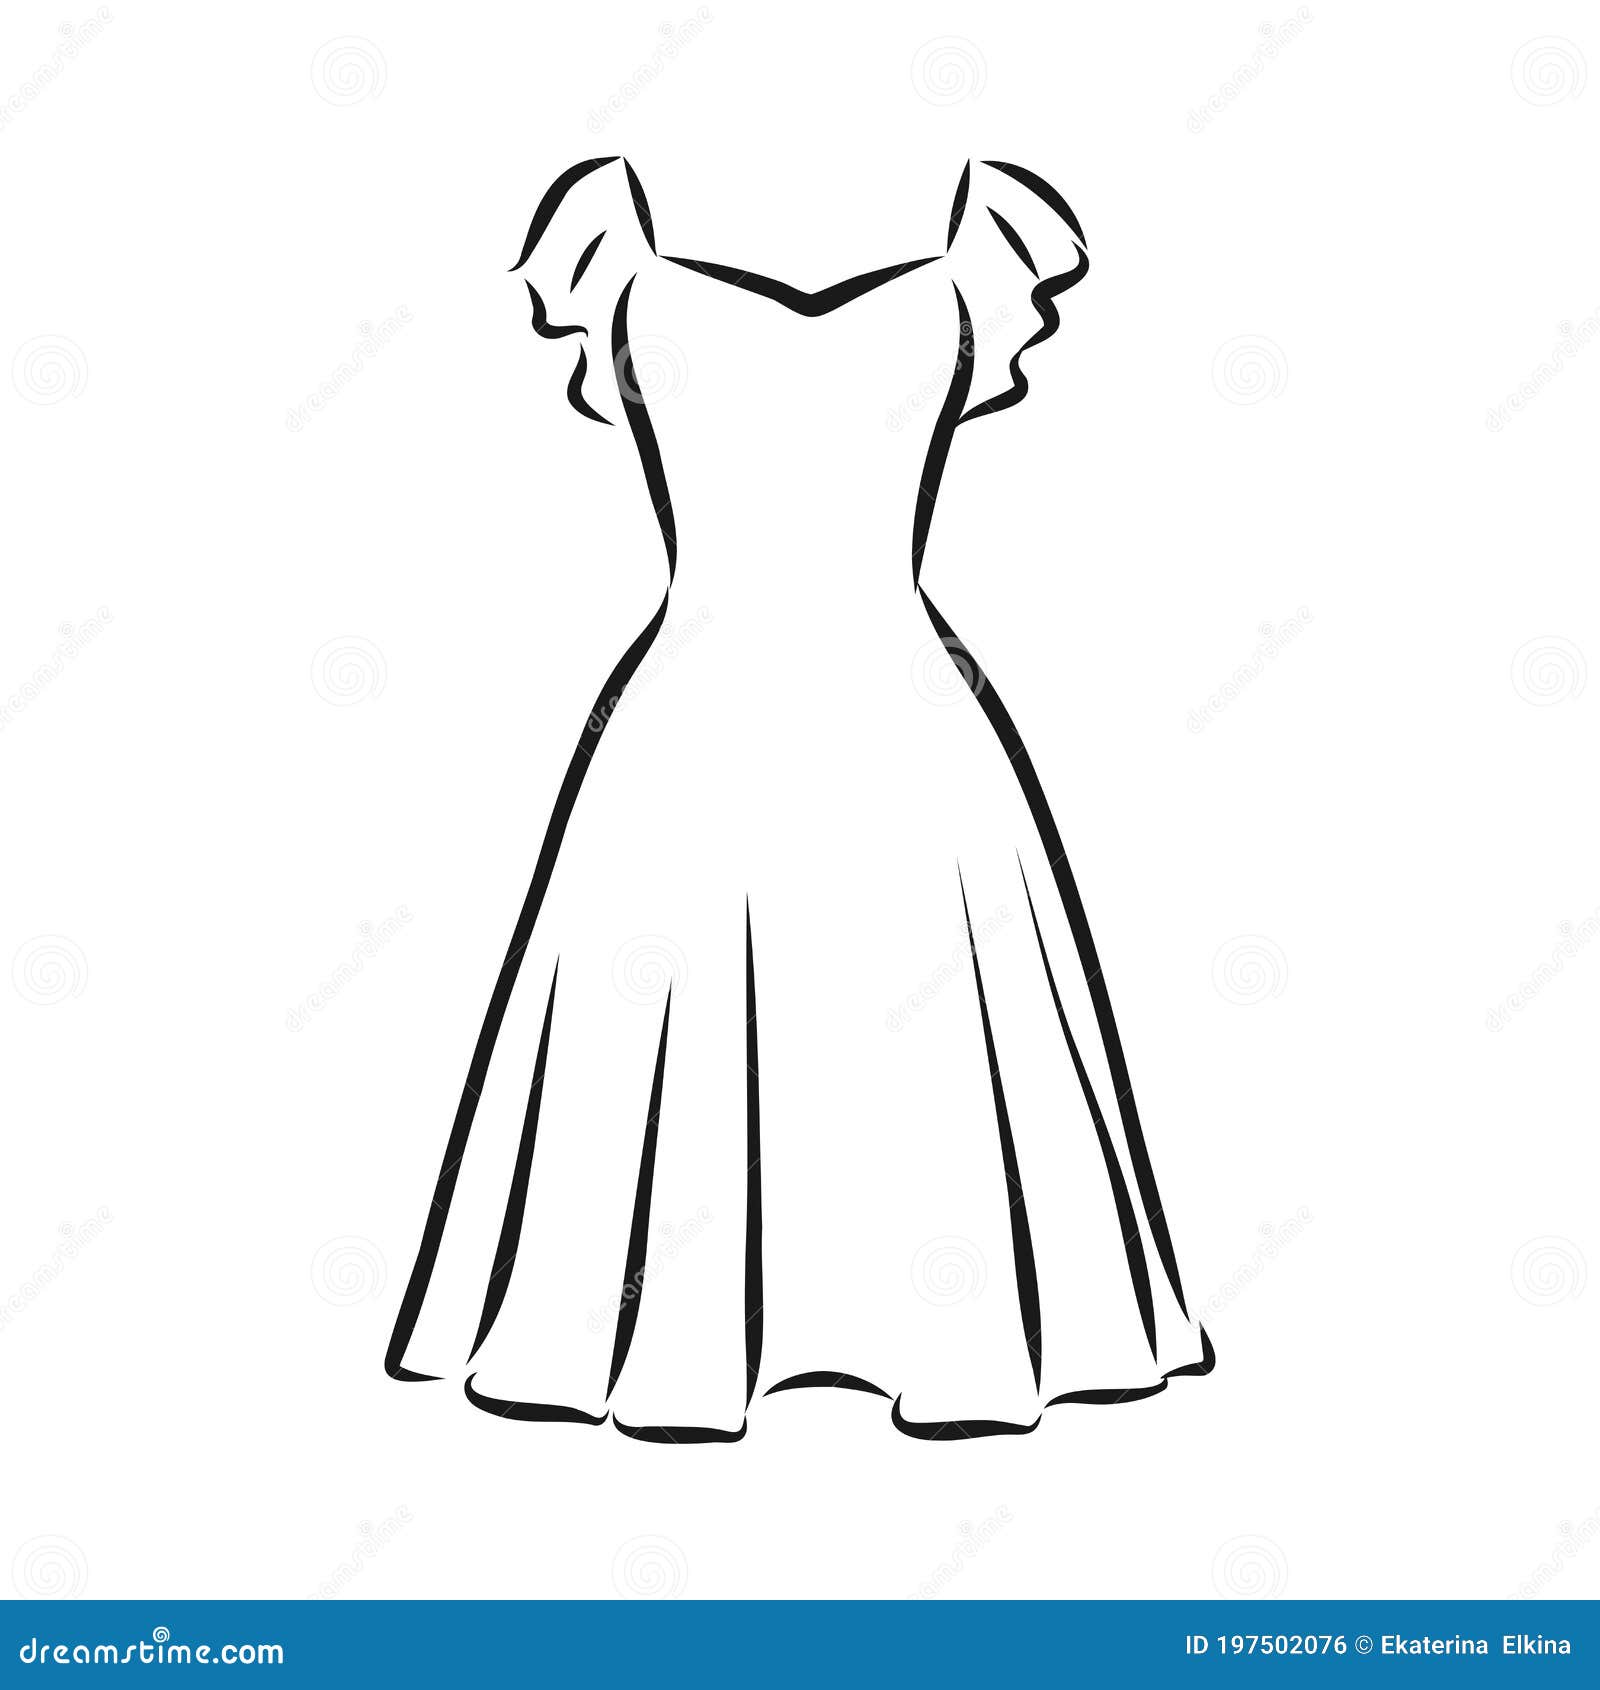 Womens dresses hand drawn black outline drawing Vector Image